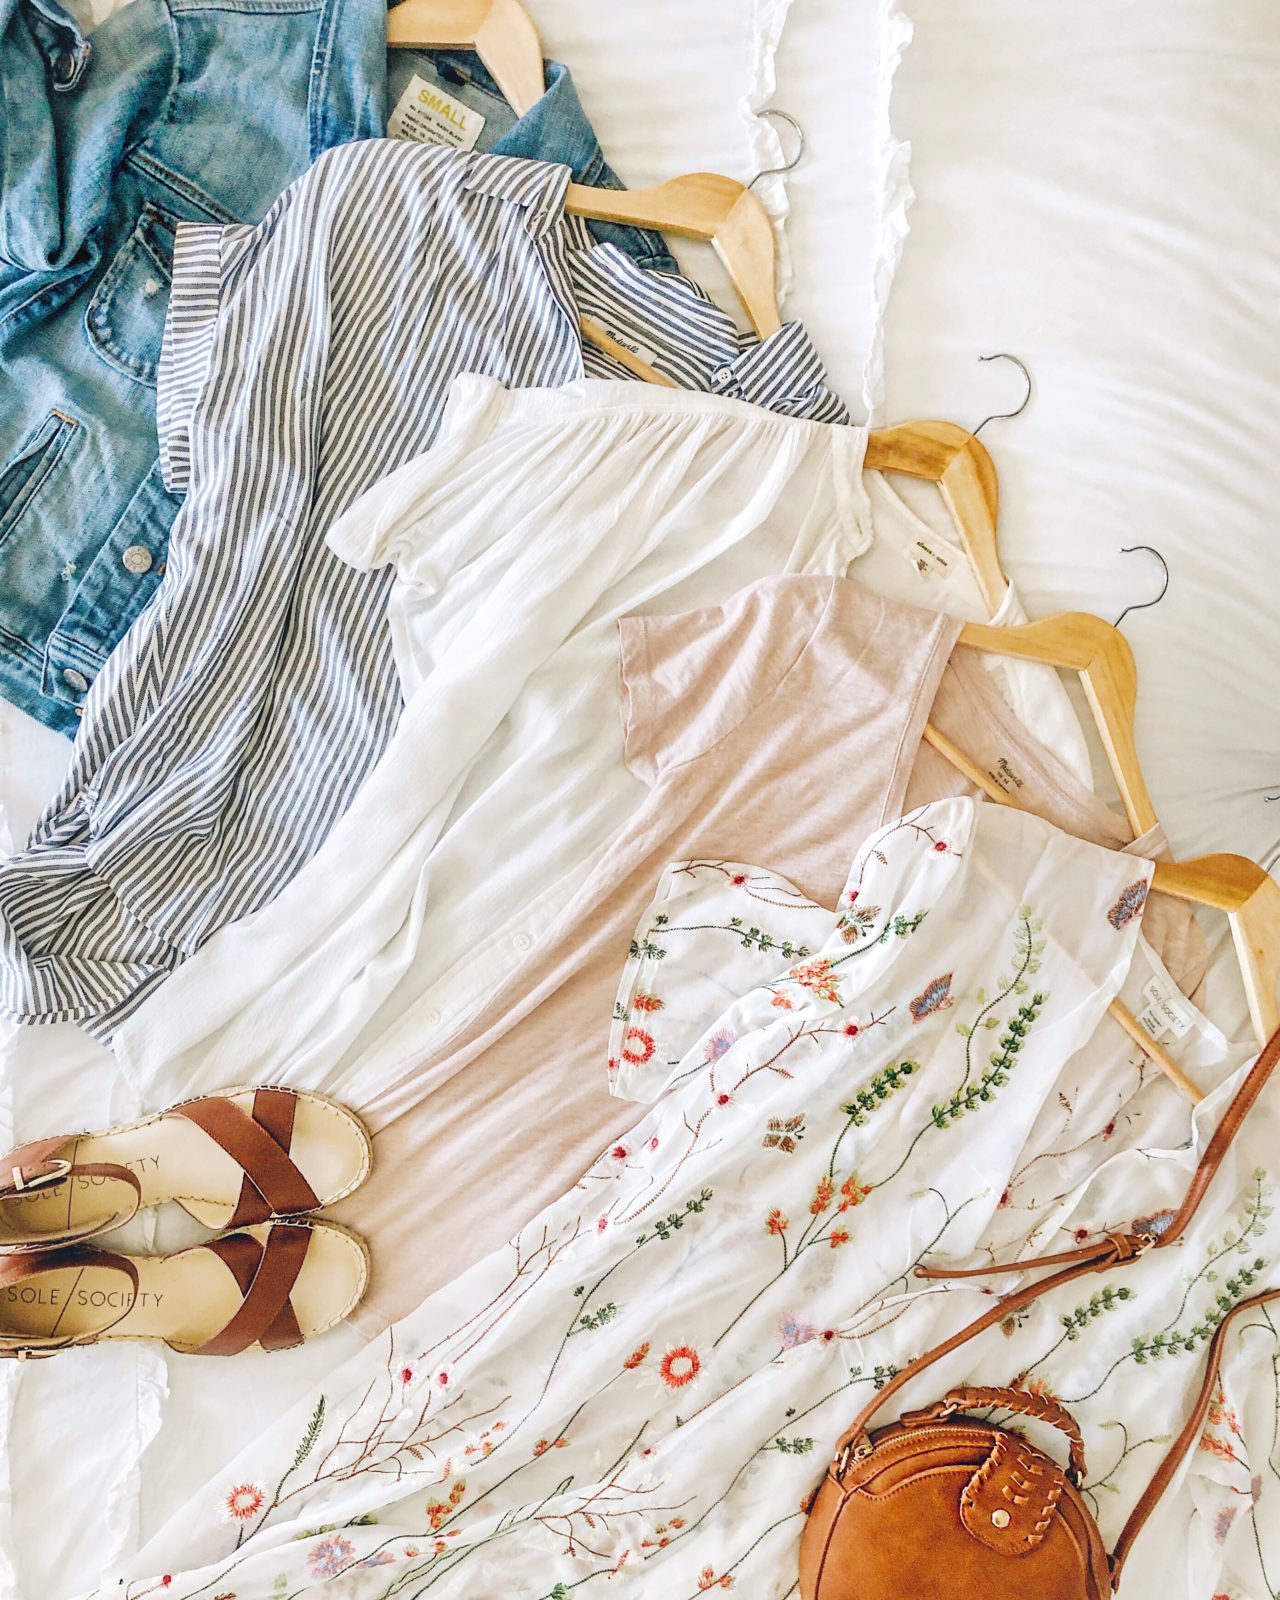 3 Tips on Vacation Packing using Capsule Wardrobes! - Cotton Stem